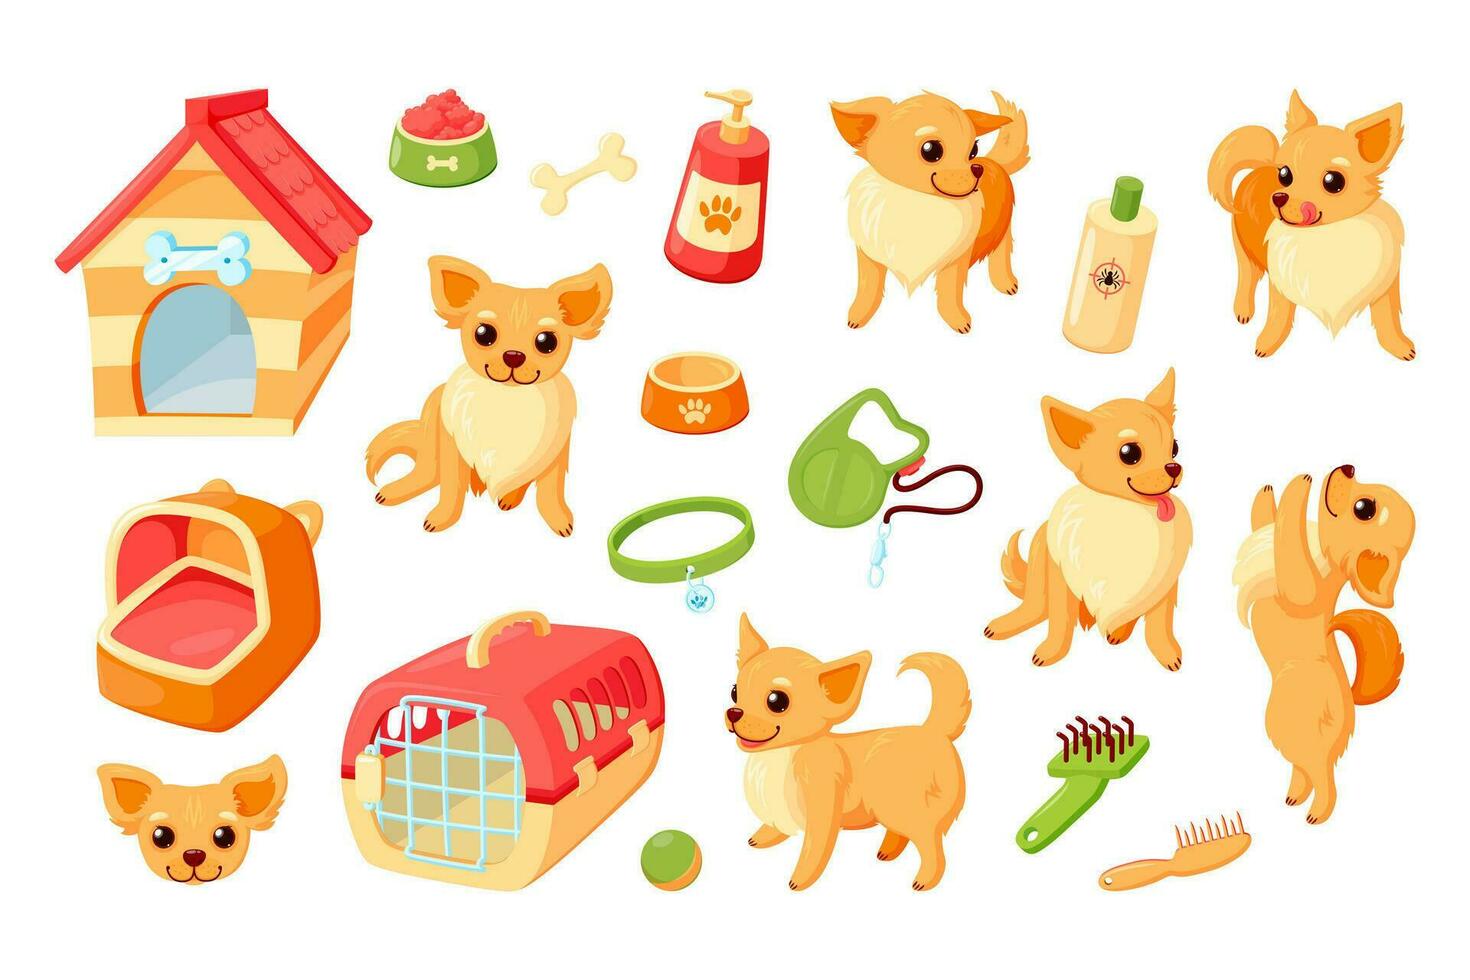 Chihuahua dog with kennel, carrier, toys and grooming stuff. Chihuahua puppy with pet accessories. Vector illustration